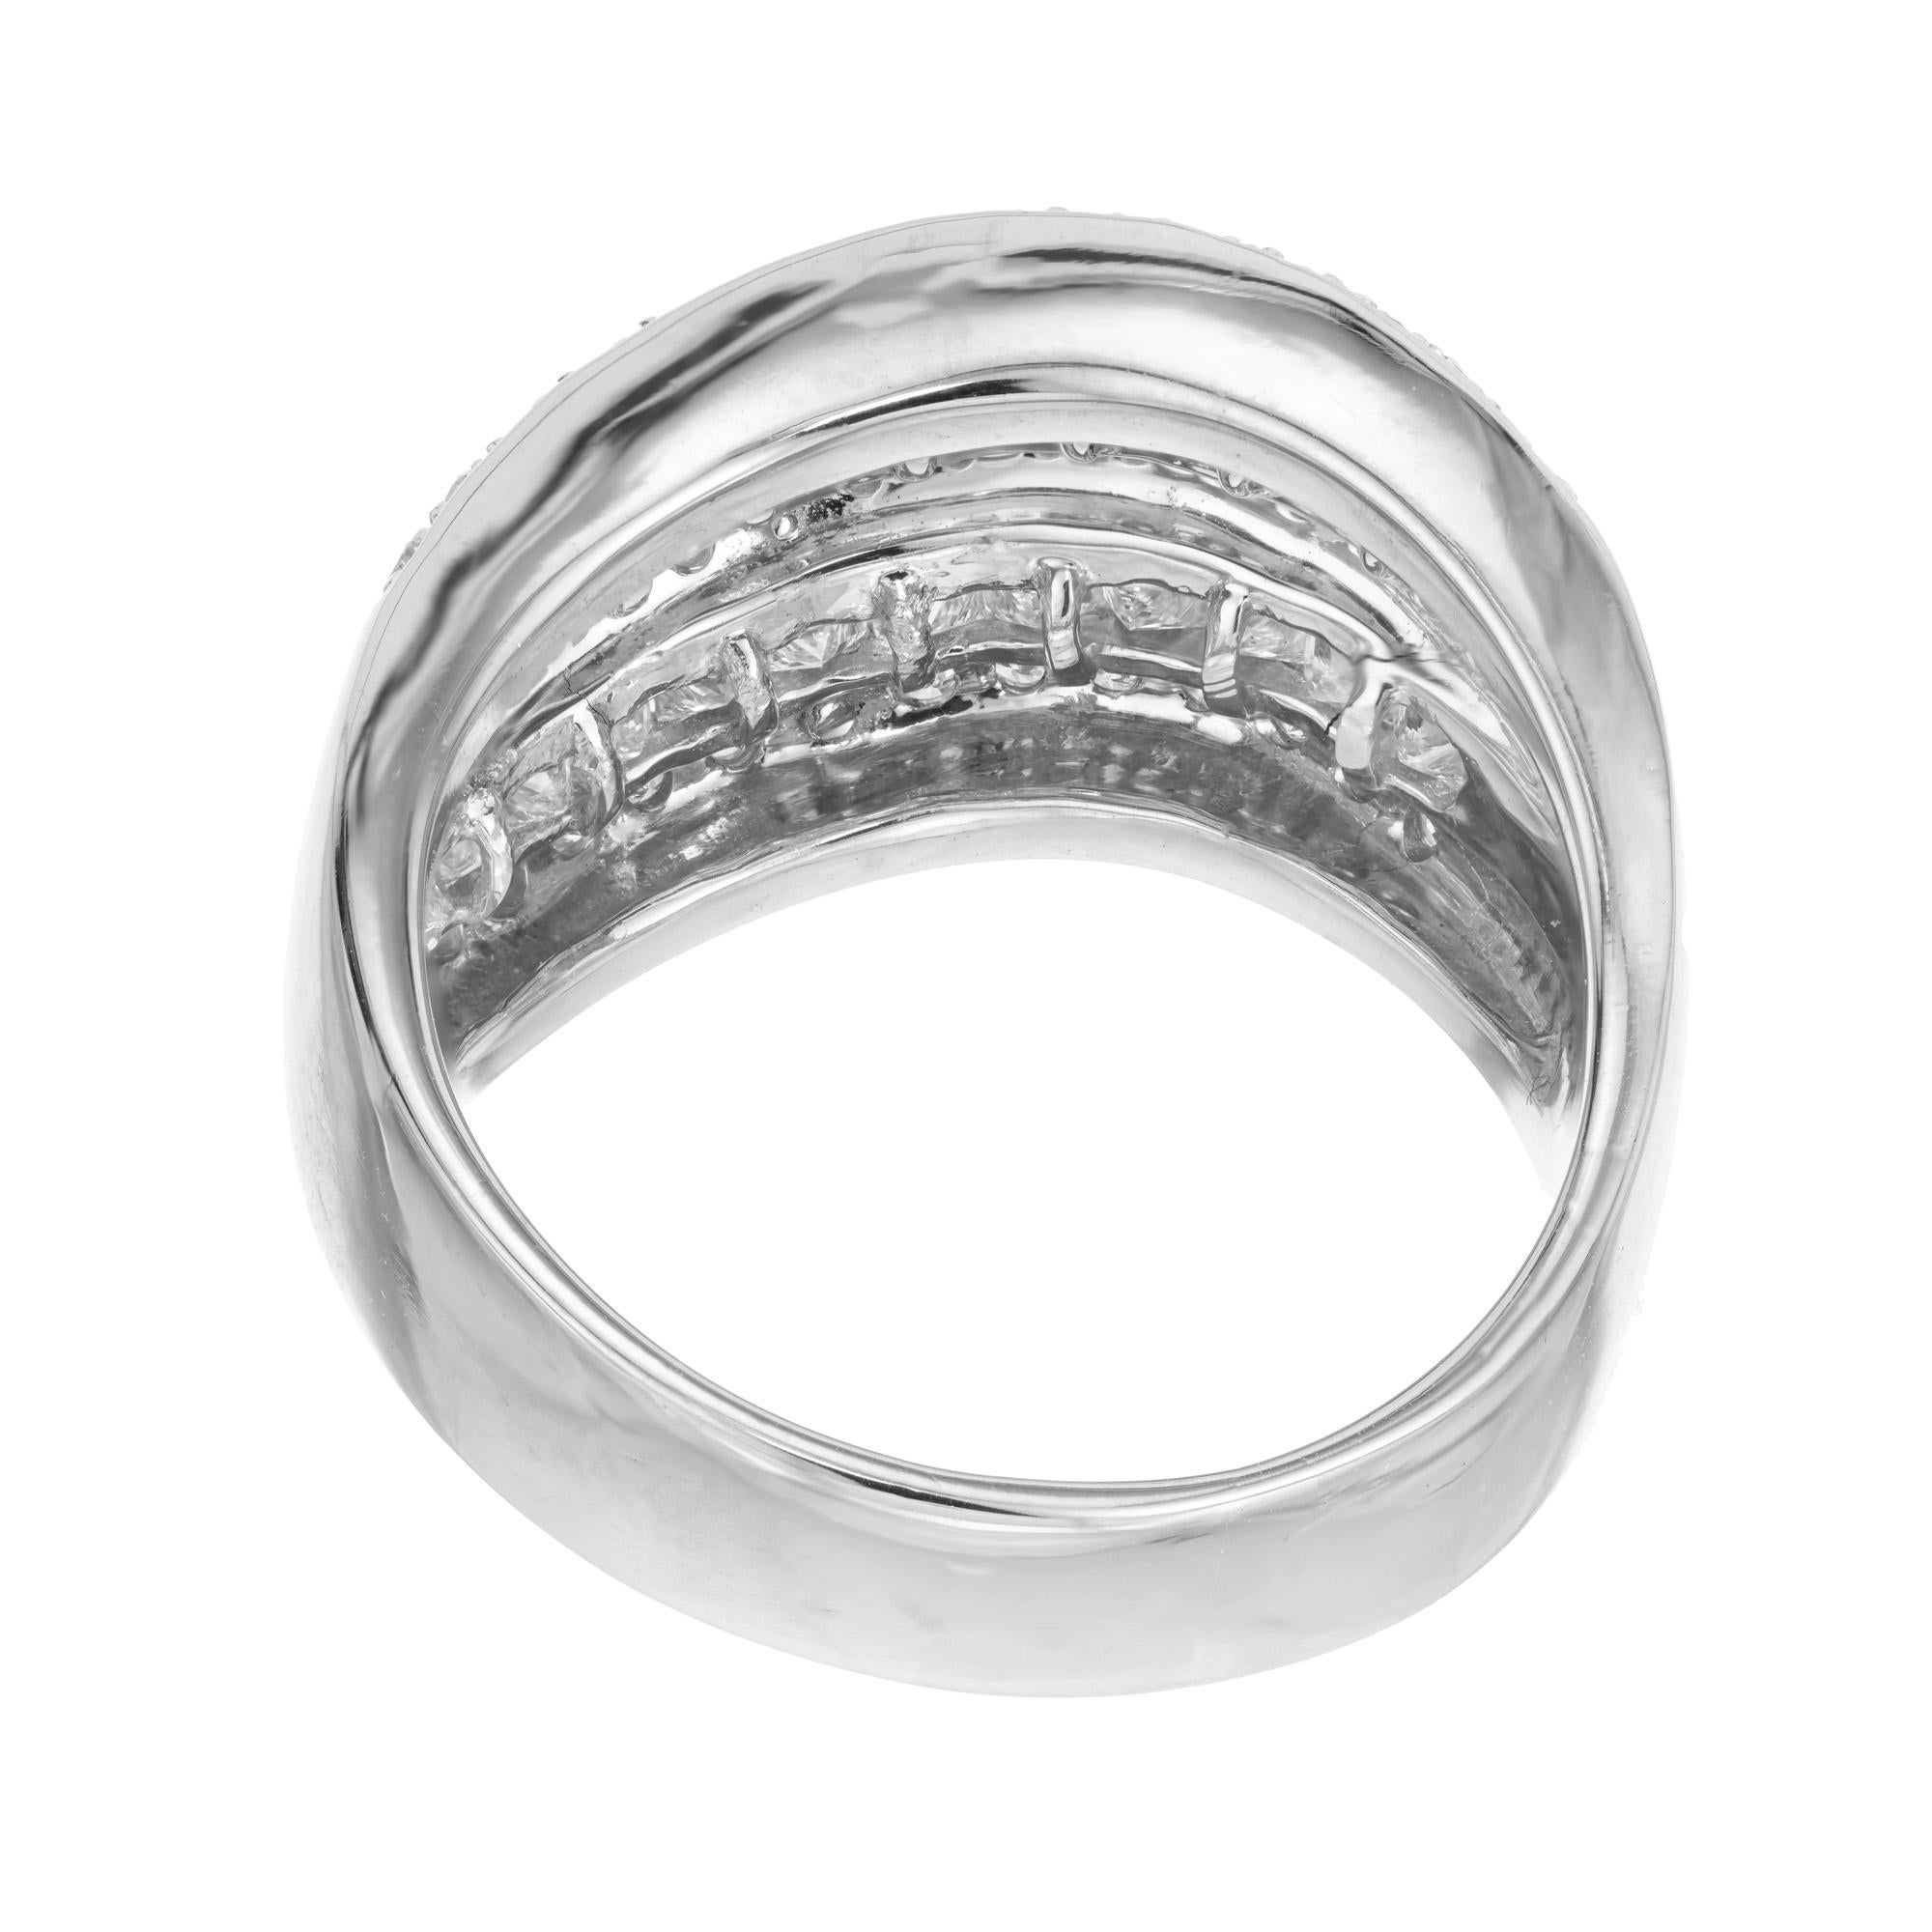 1.50 Carat Diamond White Gold Five Row Wide Swirl Cocktail Ring For Sale 1